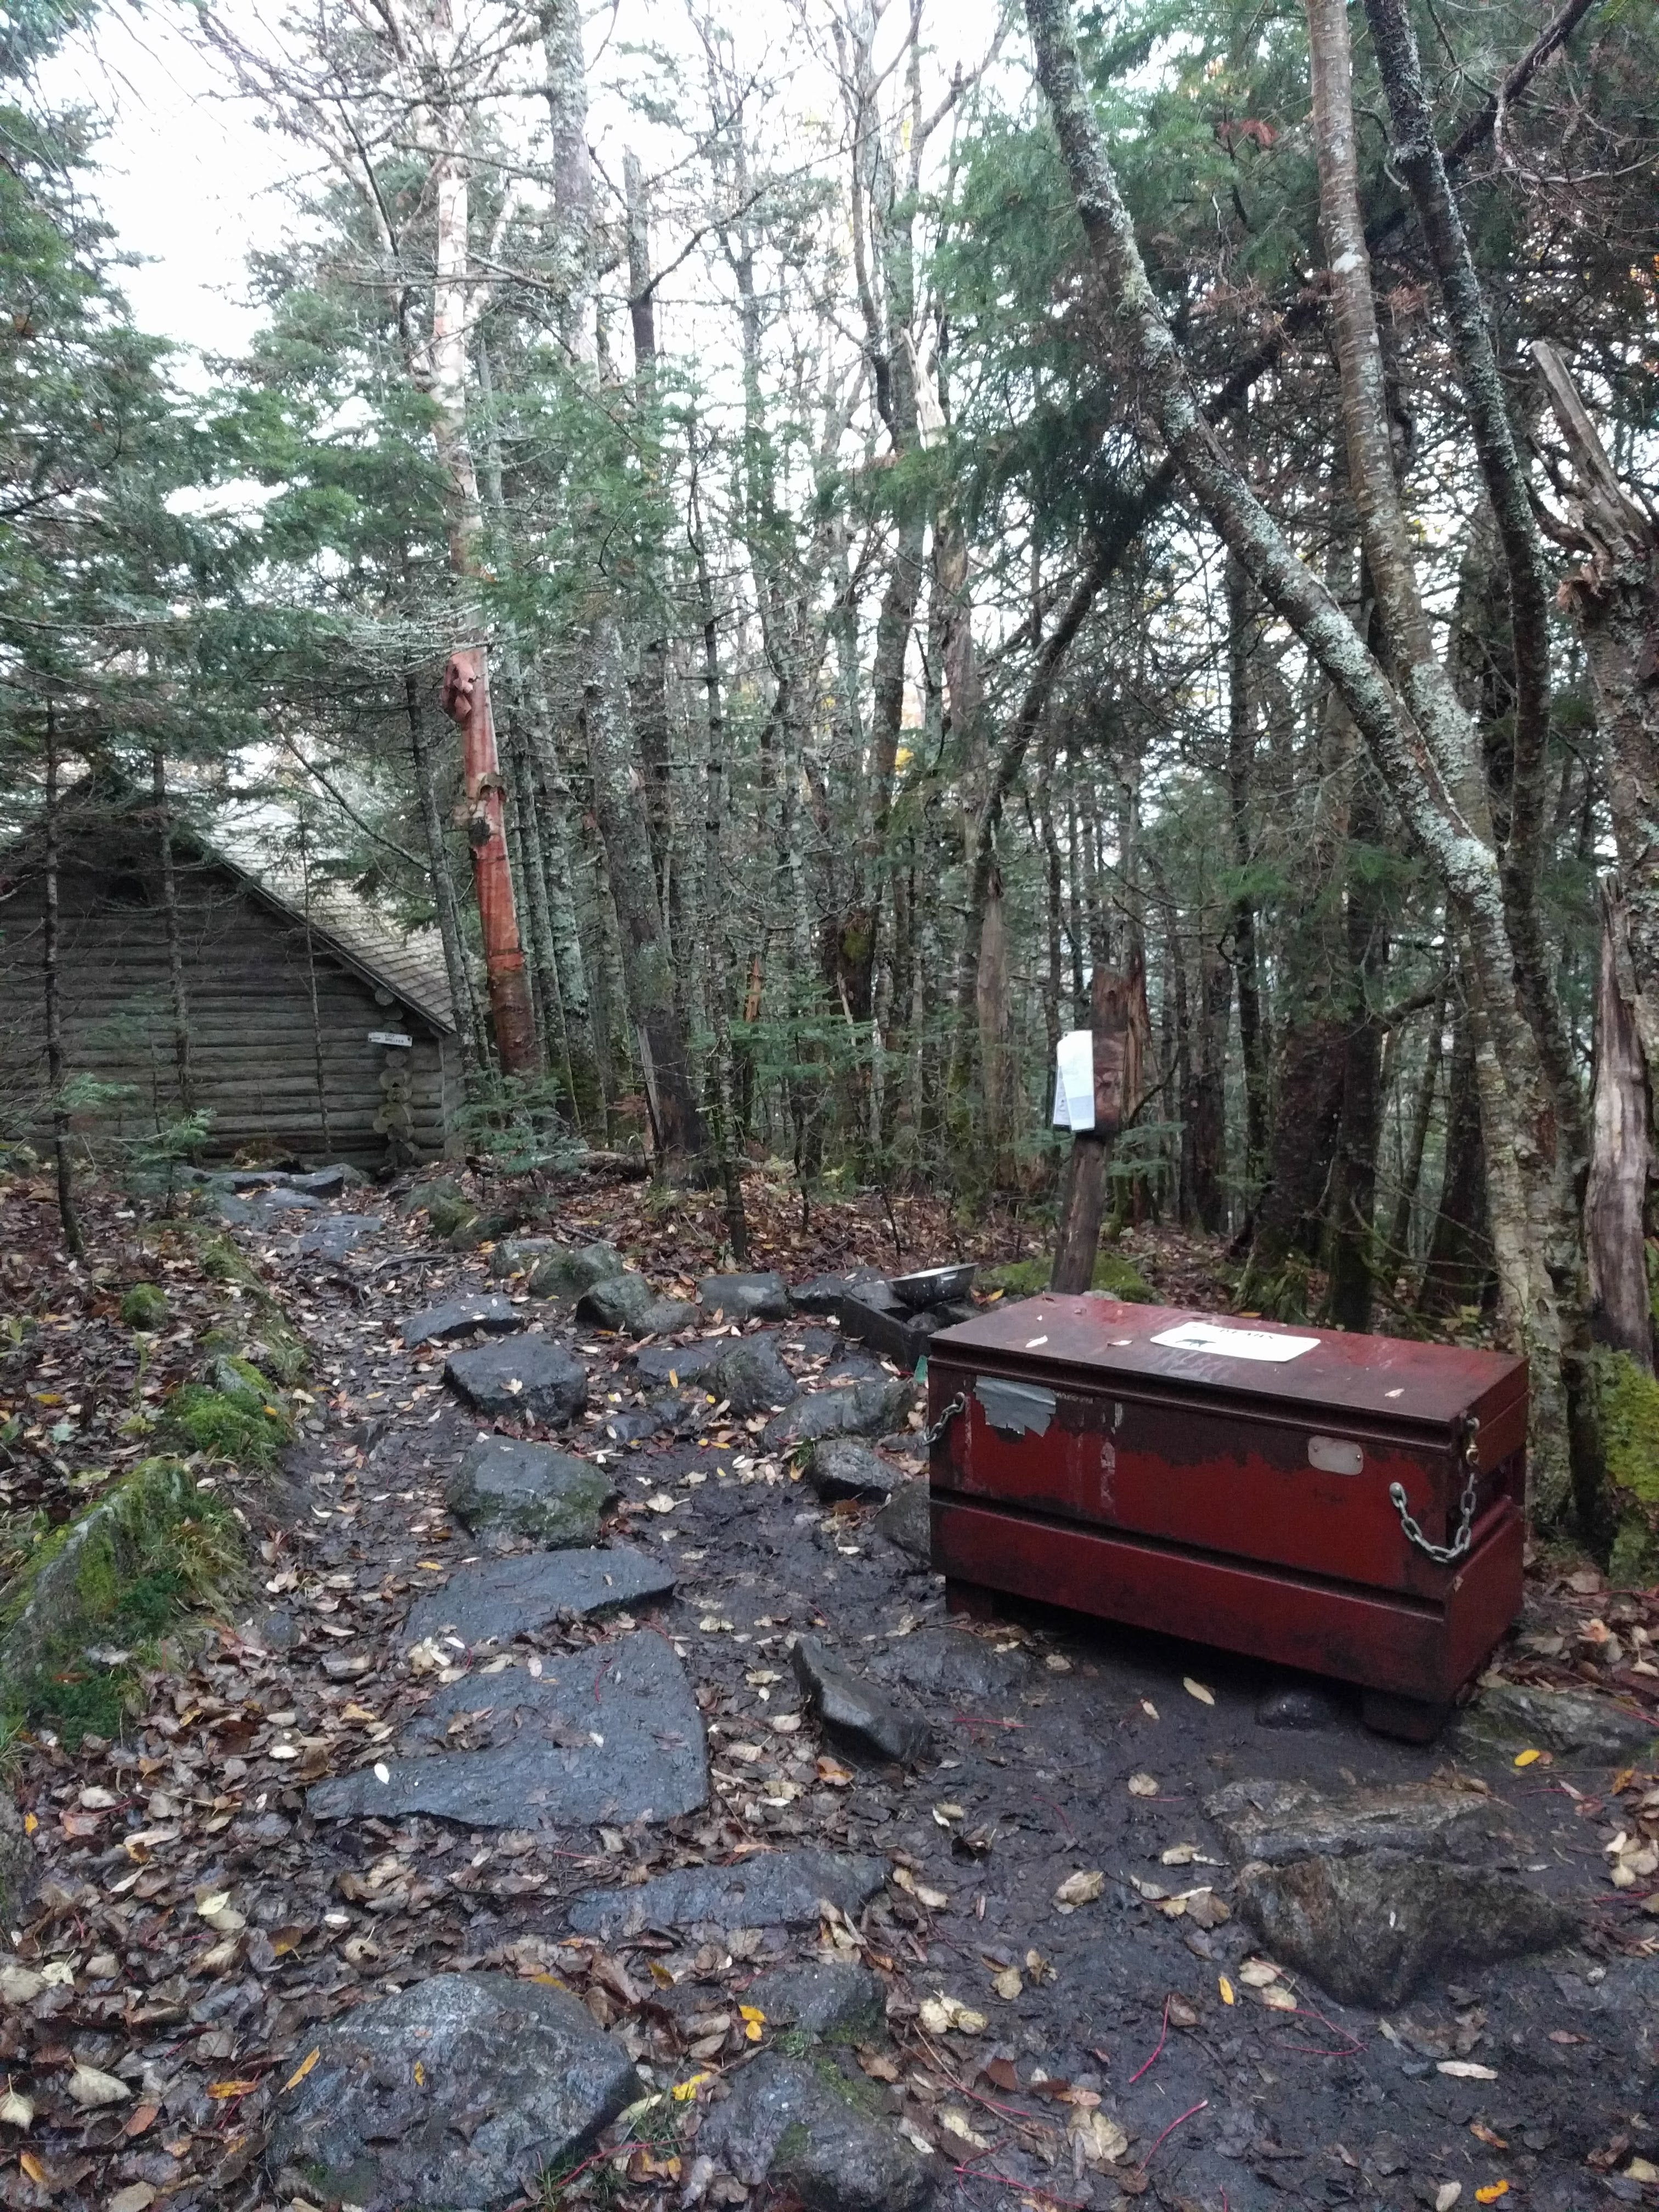 The site was well supplied with a bear box and outhouse.